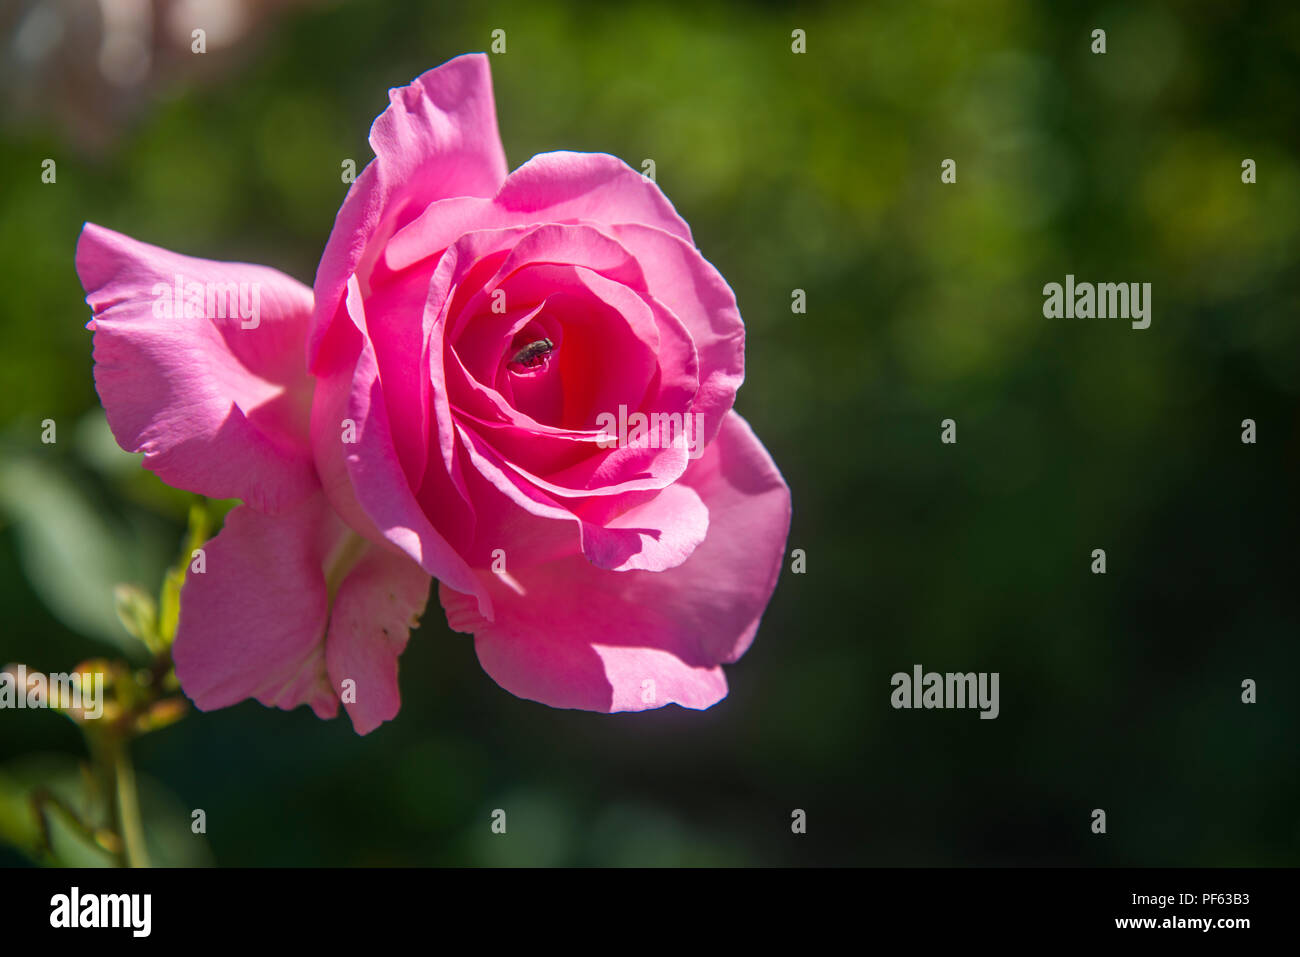 Pink rose with fly in it. Stock Photo